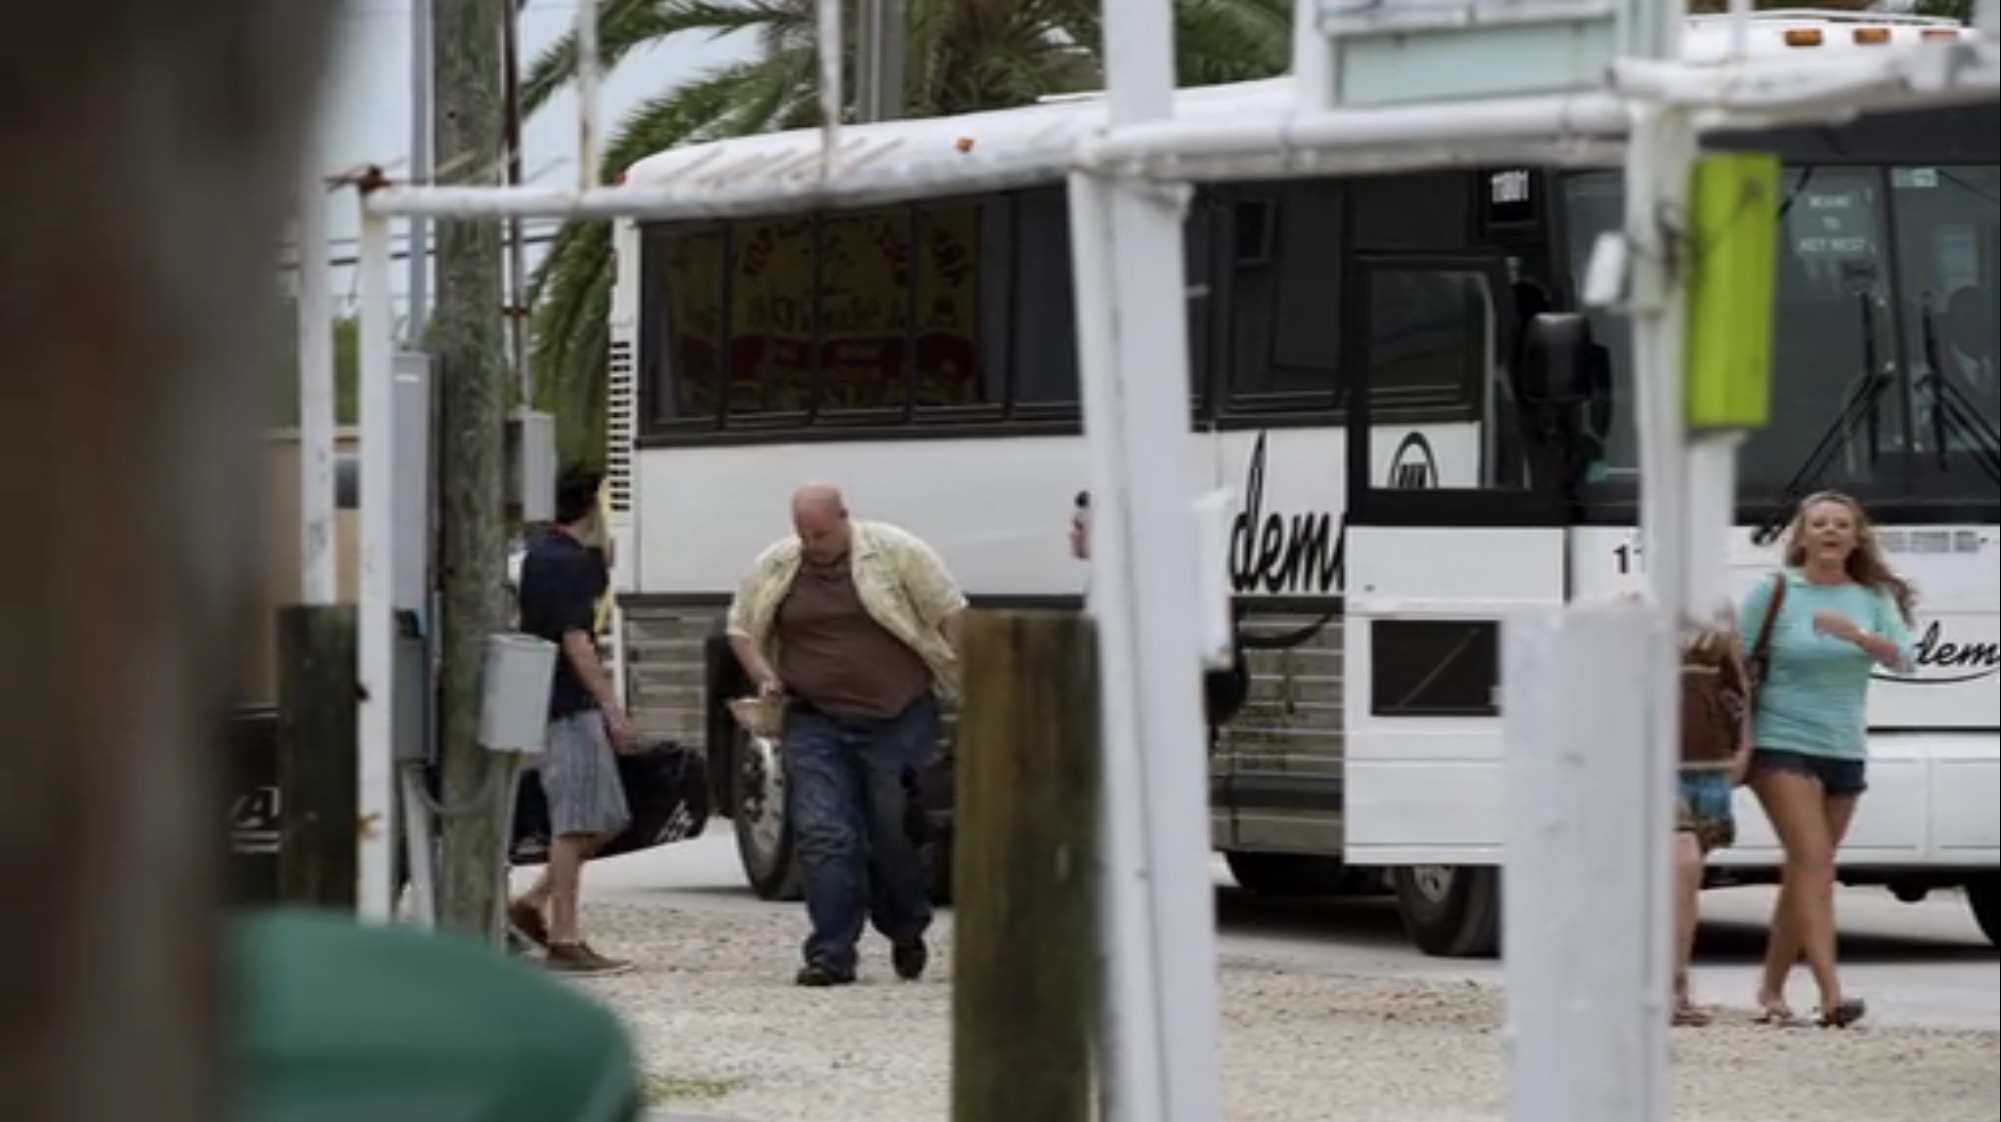 Heavy Man off the bus on Bloodline featured extra.